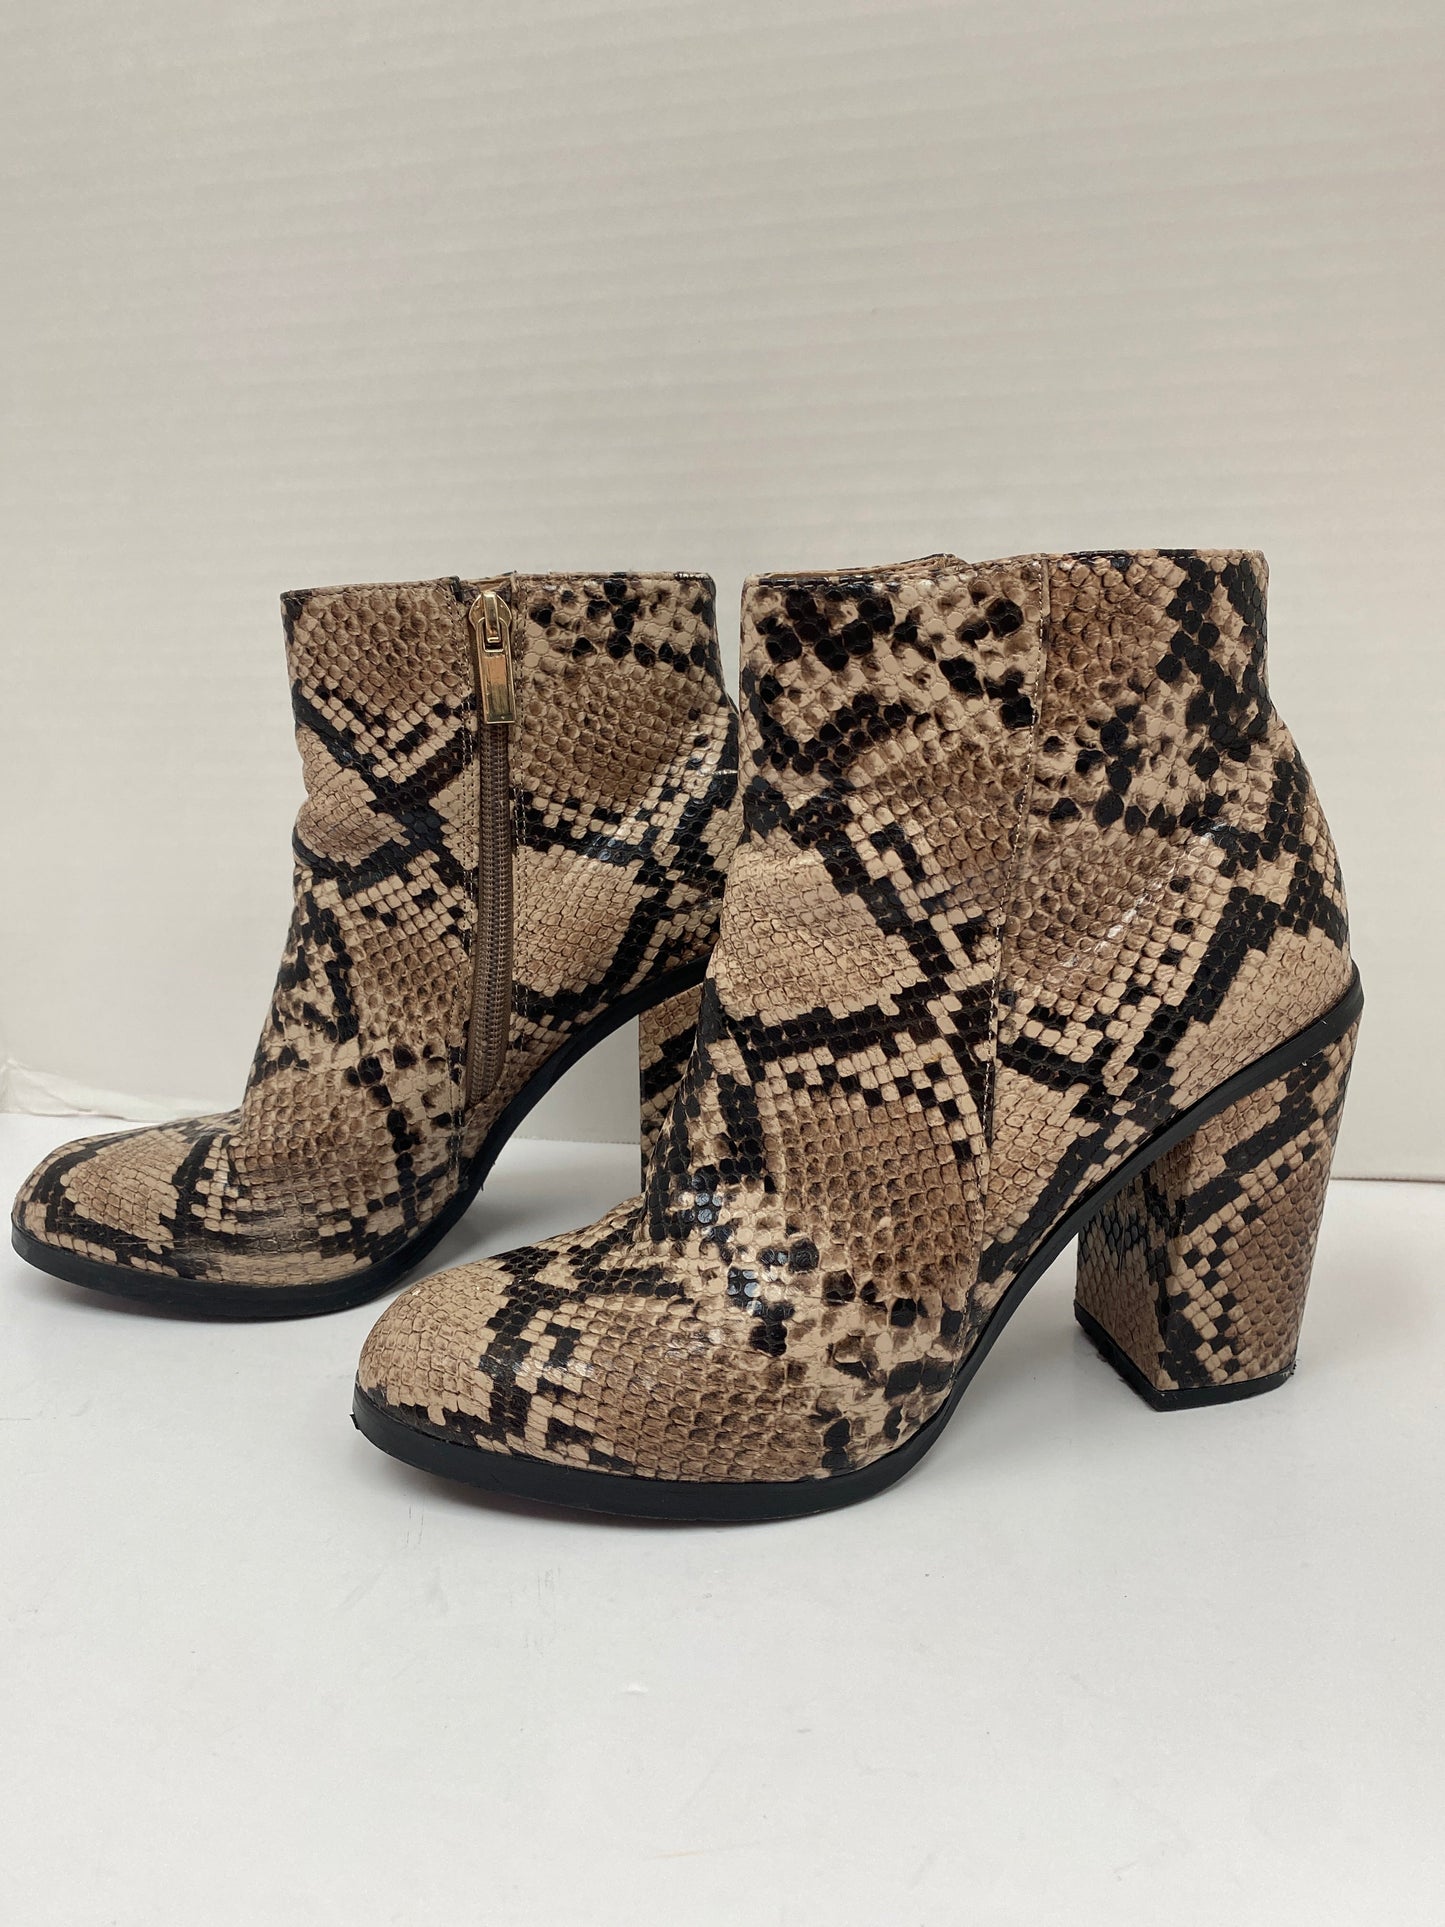 Animal Print Boots Ankle Heels New Look, Size 5